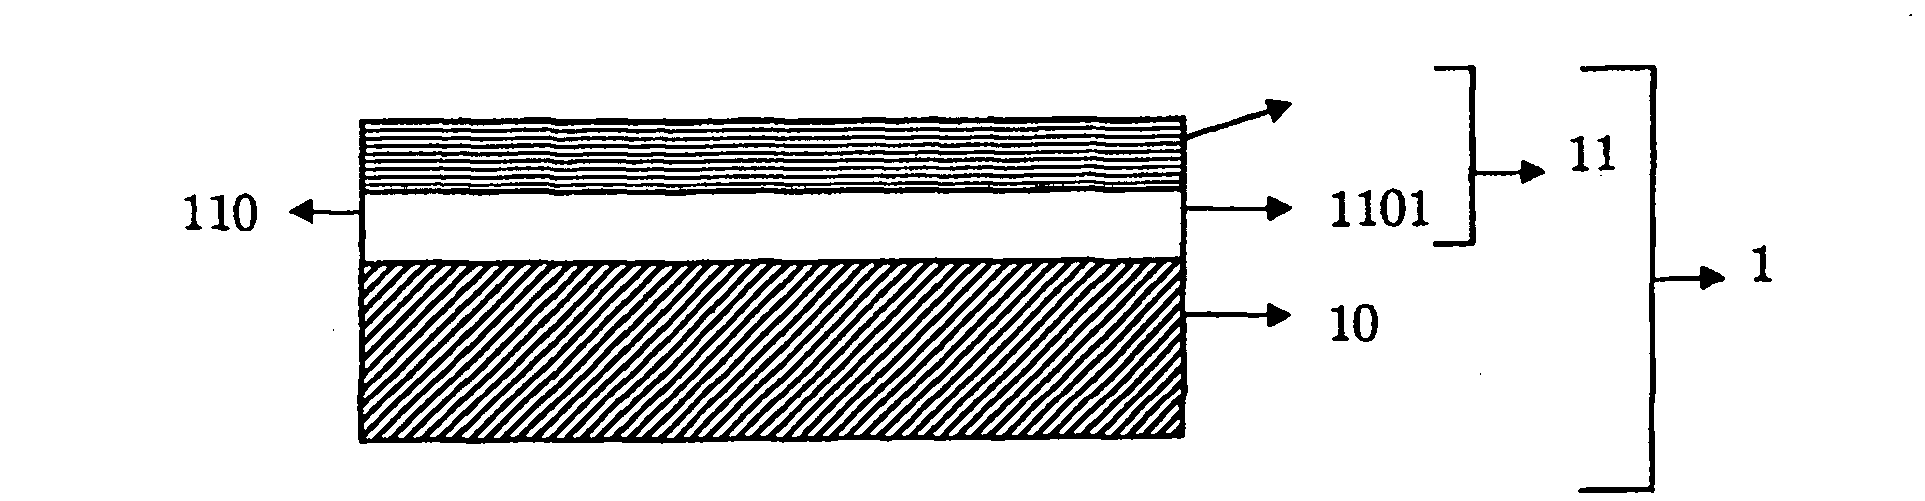 Transparent substrate for photonic devices